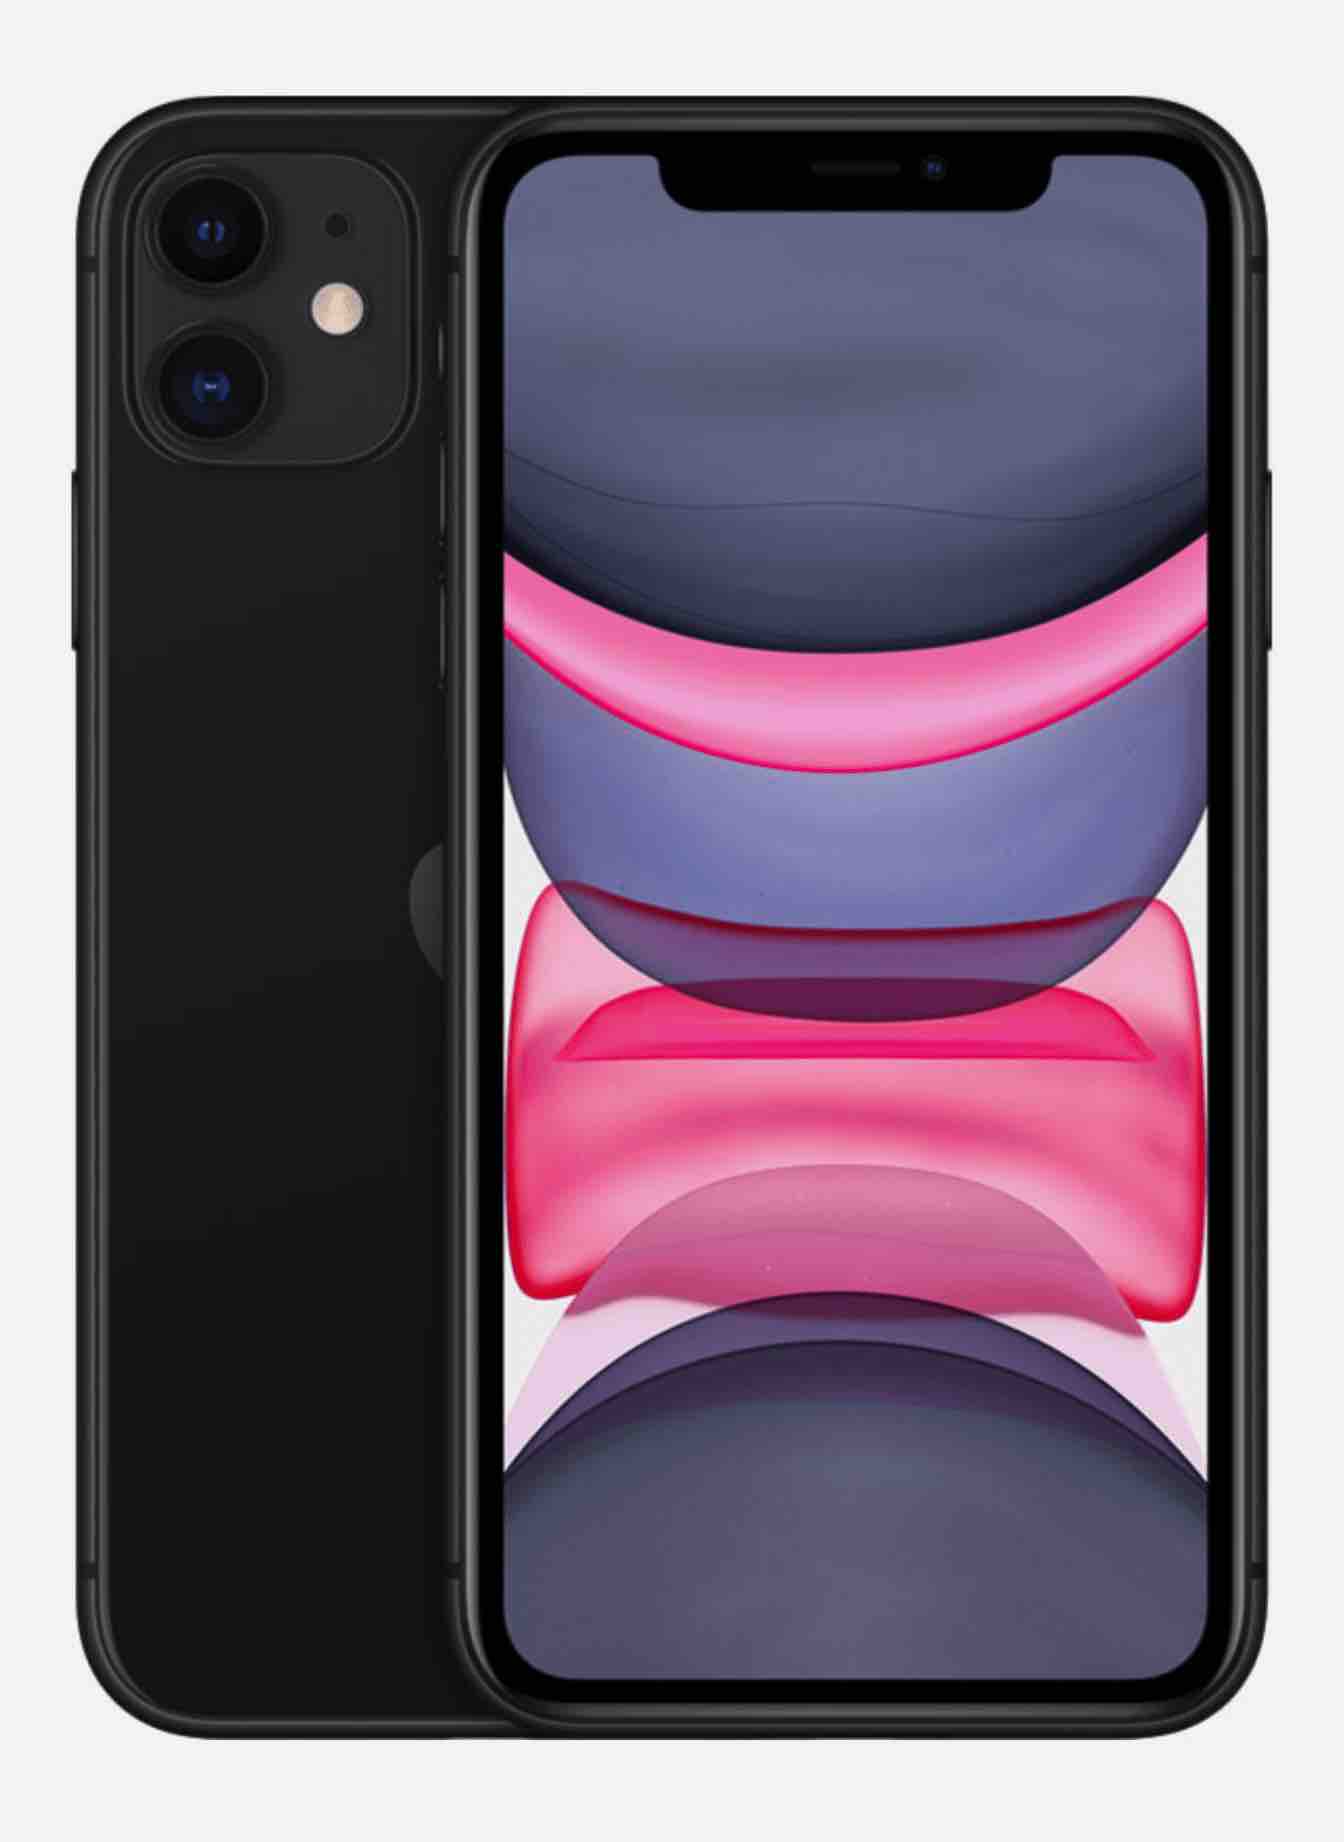 Apple - iPhone 11 64GB Black was listed for R6,693.00 on 29 Feb at 15: ...